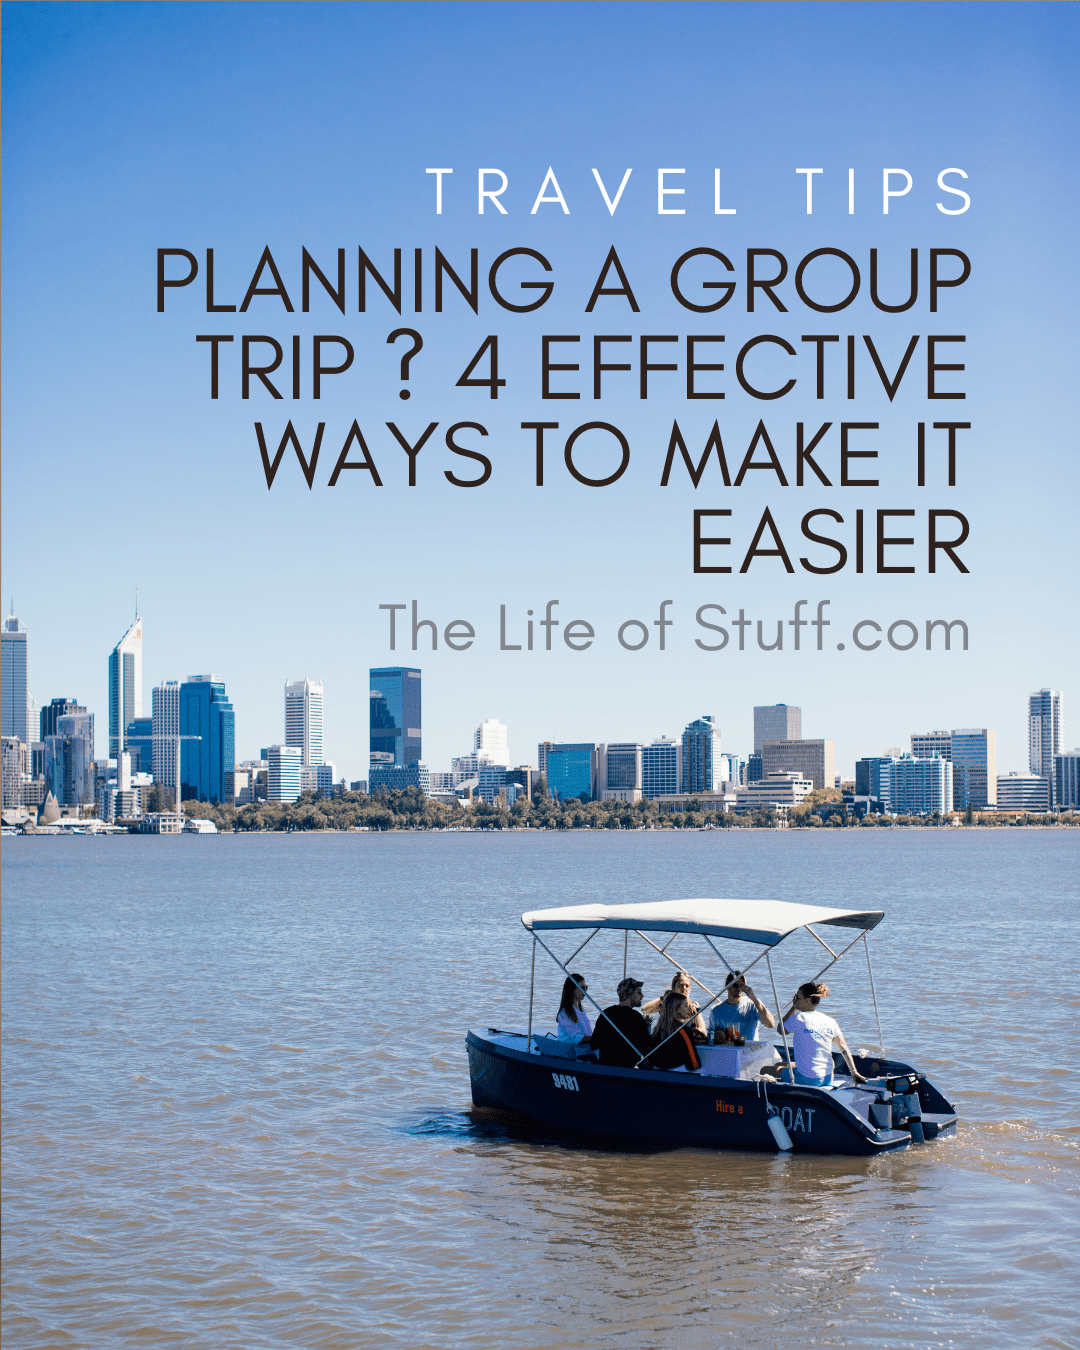 Planning A Group Trip ? 4 Effective Ways to Make it Easier - The LIfe of Stuff